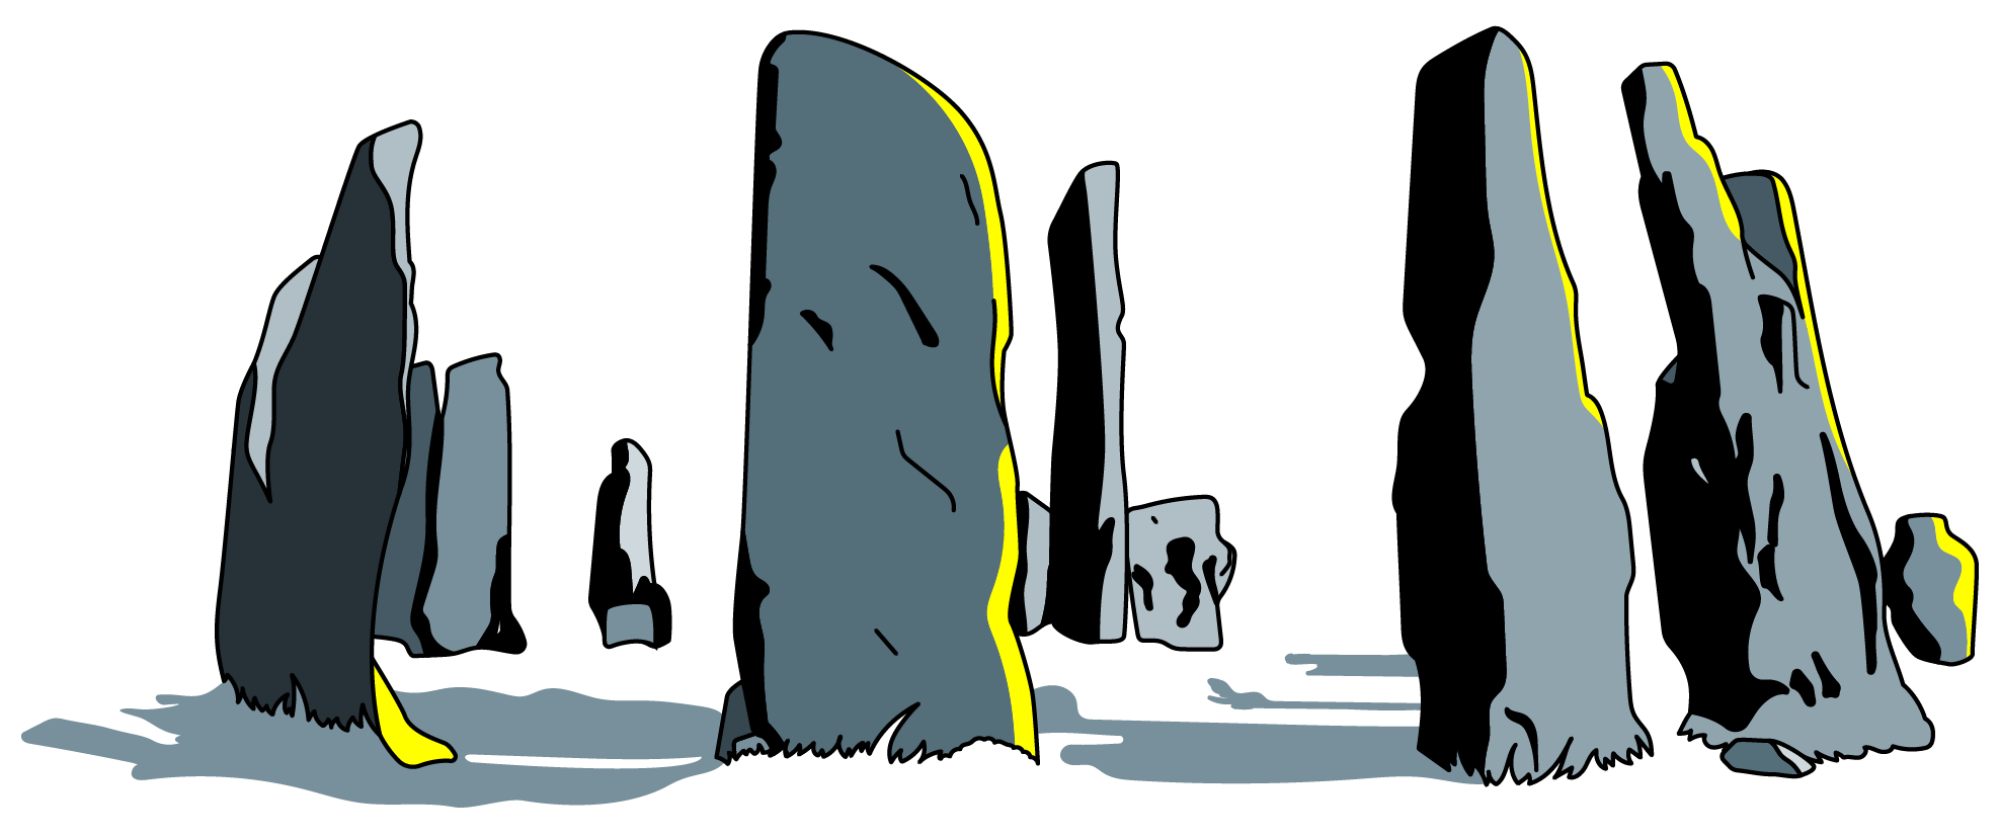 Illustration of the standing stones from "Outlander"